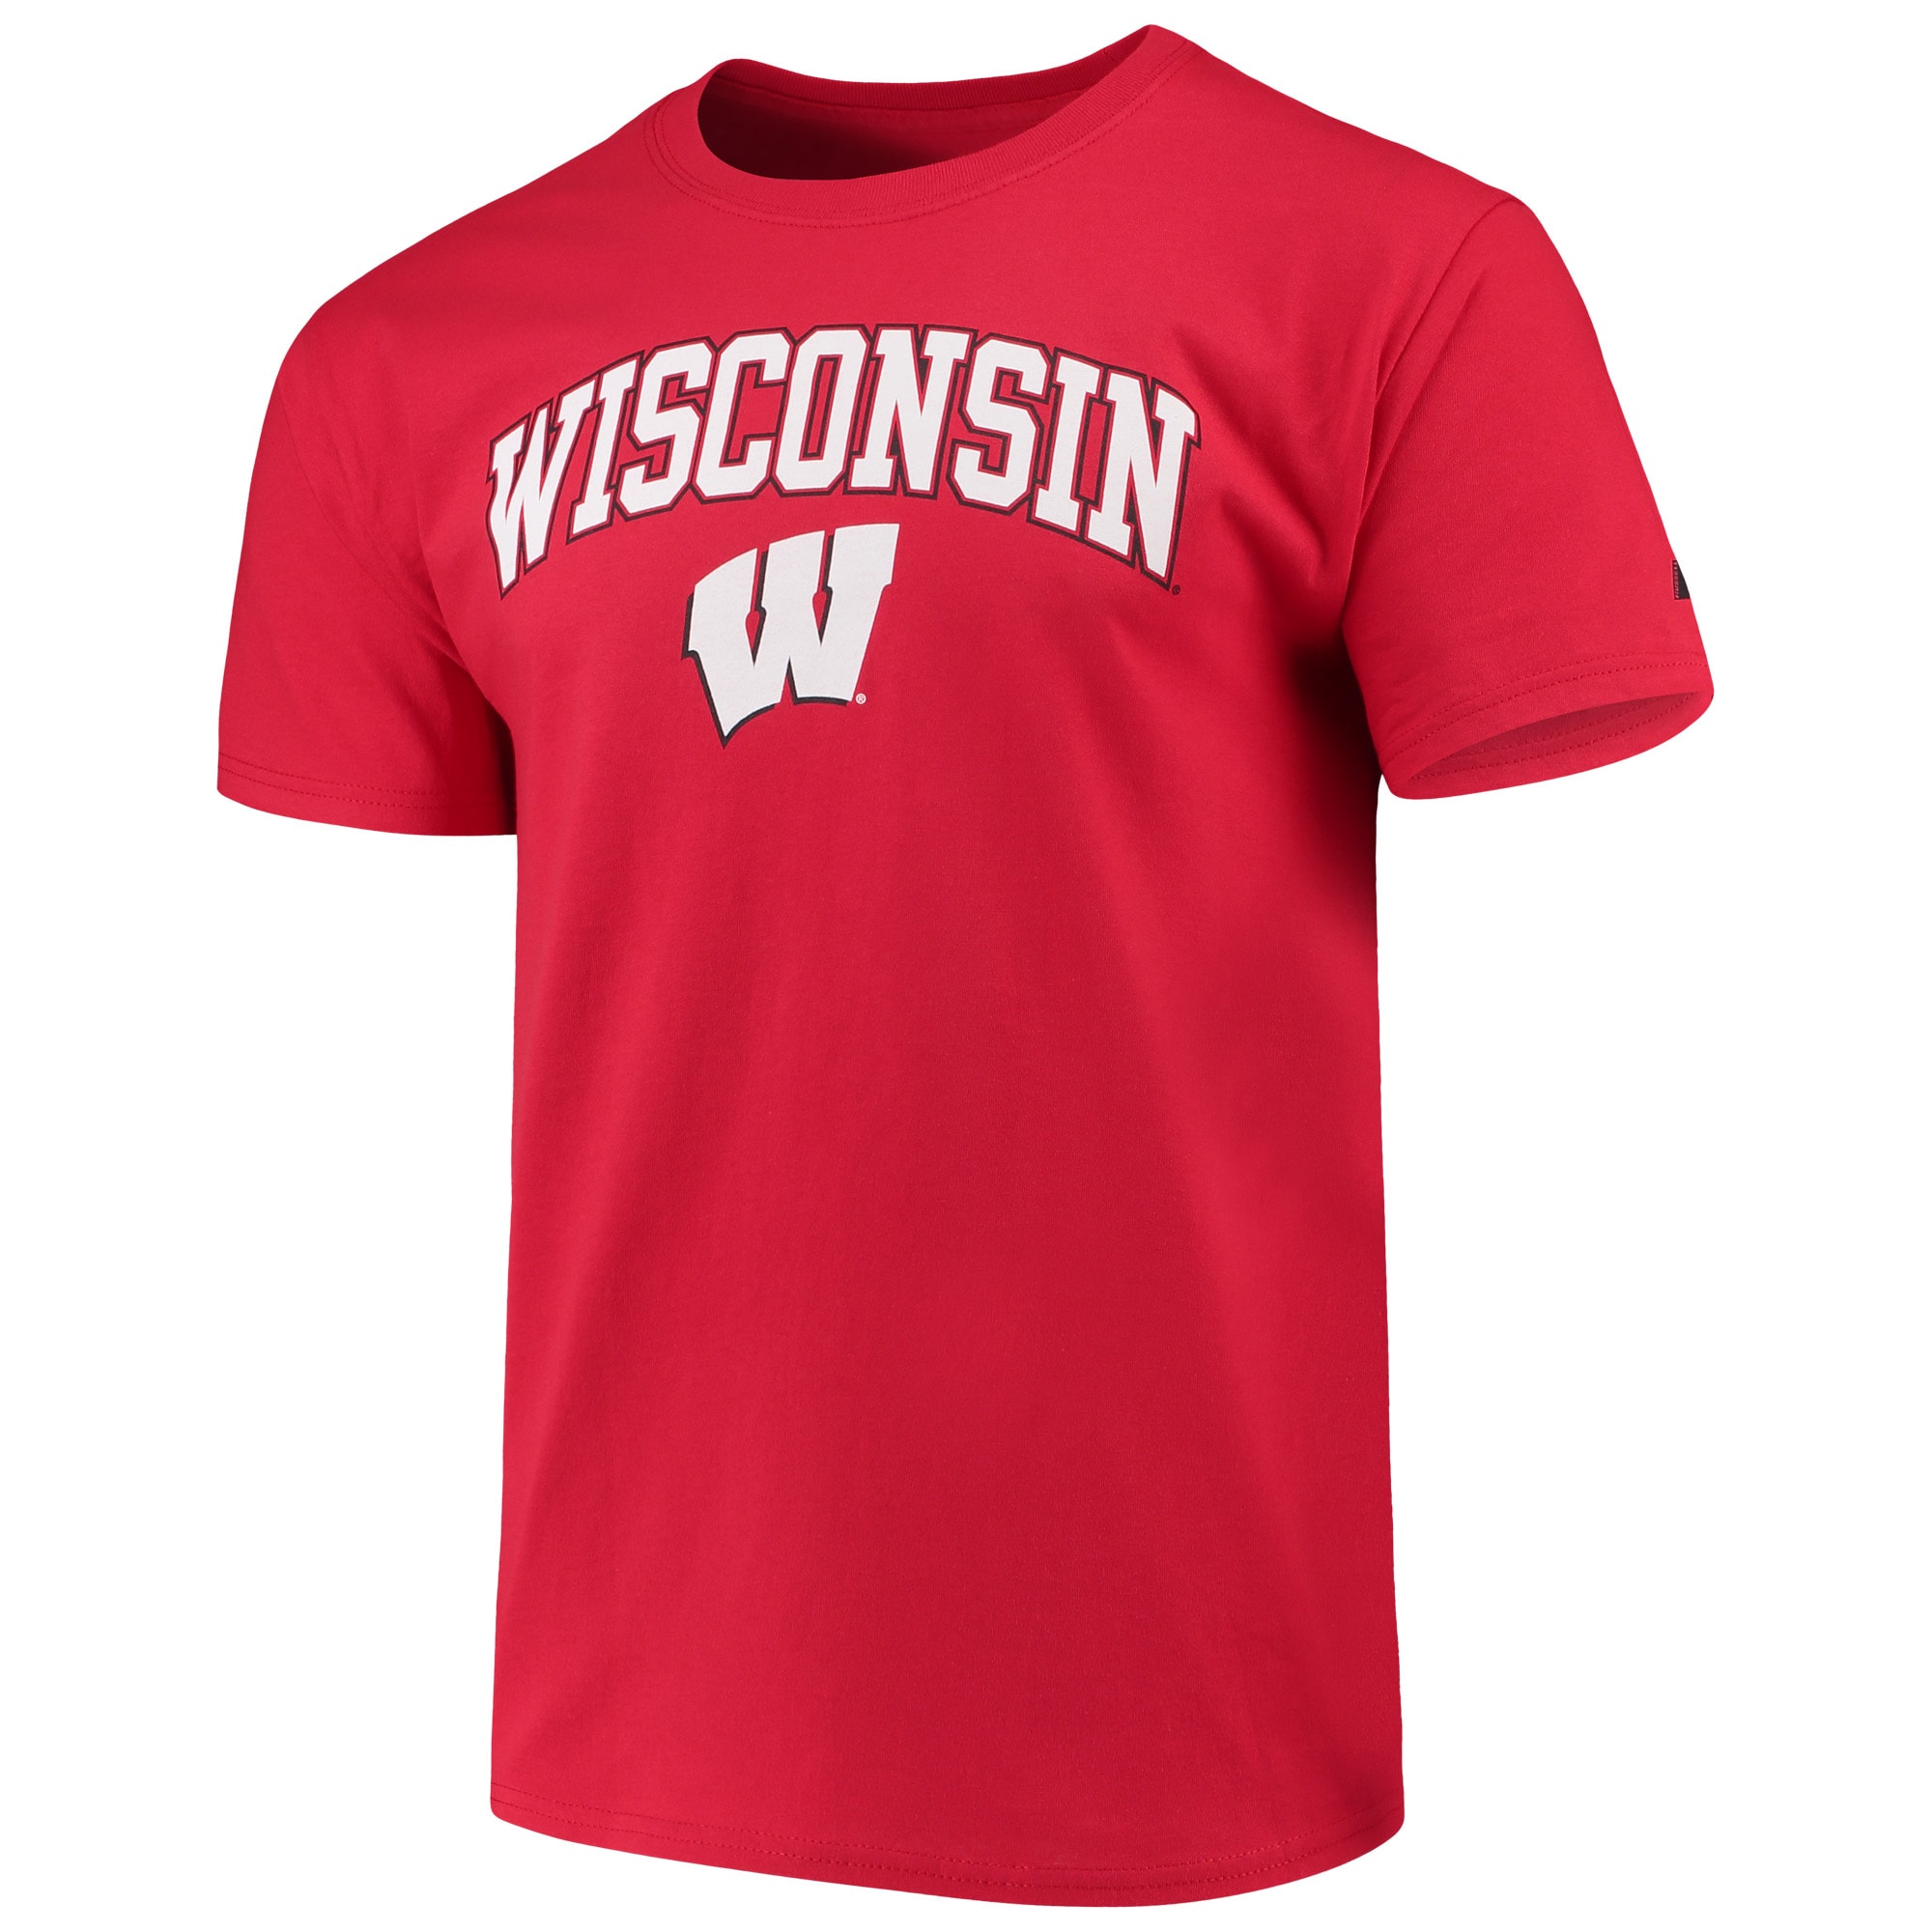 Men's Russell Athletic Red Wisconsin Badgers Crew Core Print T-Shirt - image 2 of 3